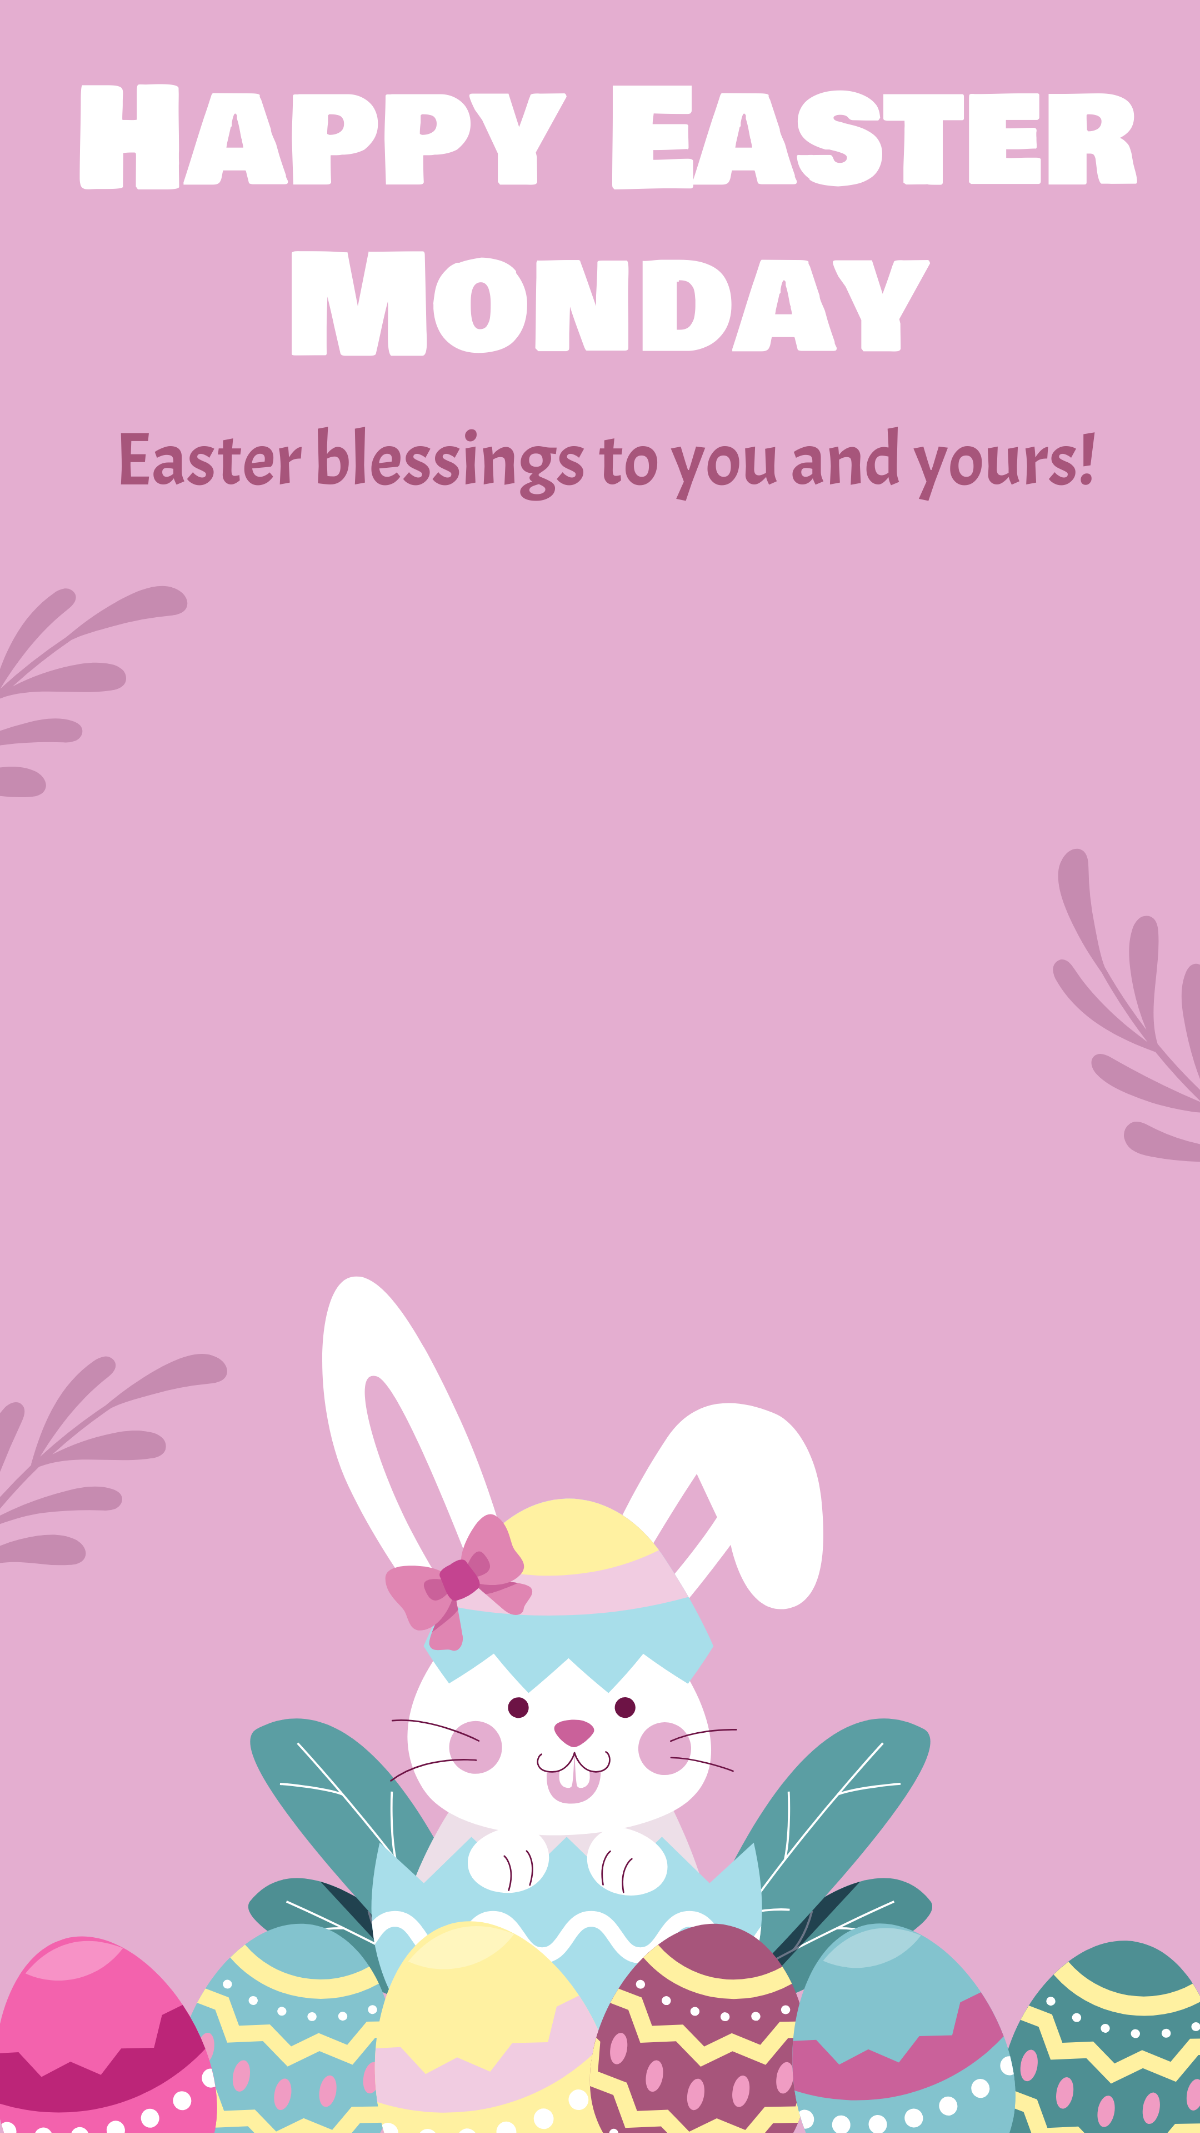 Easter Monday Snapchat Geofilter Template